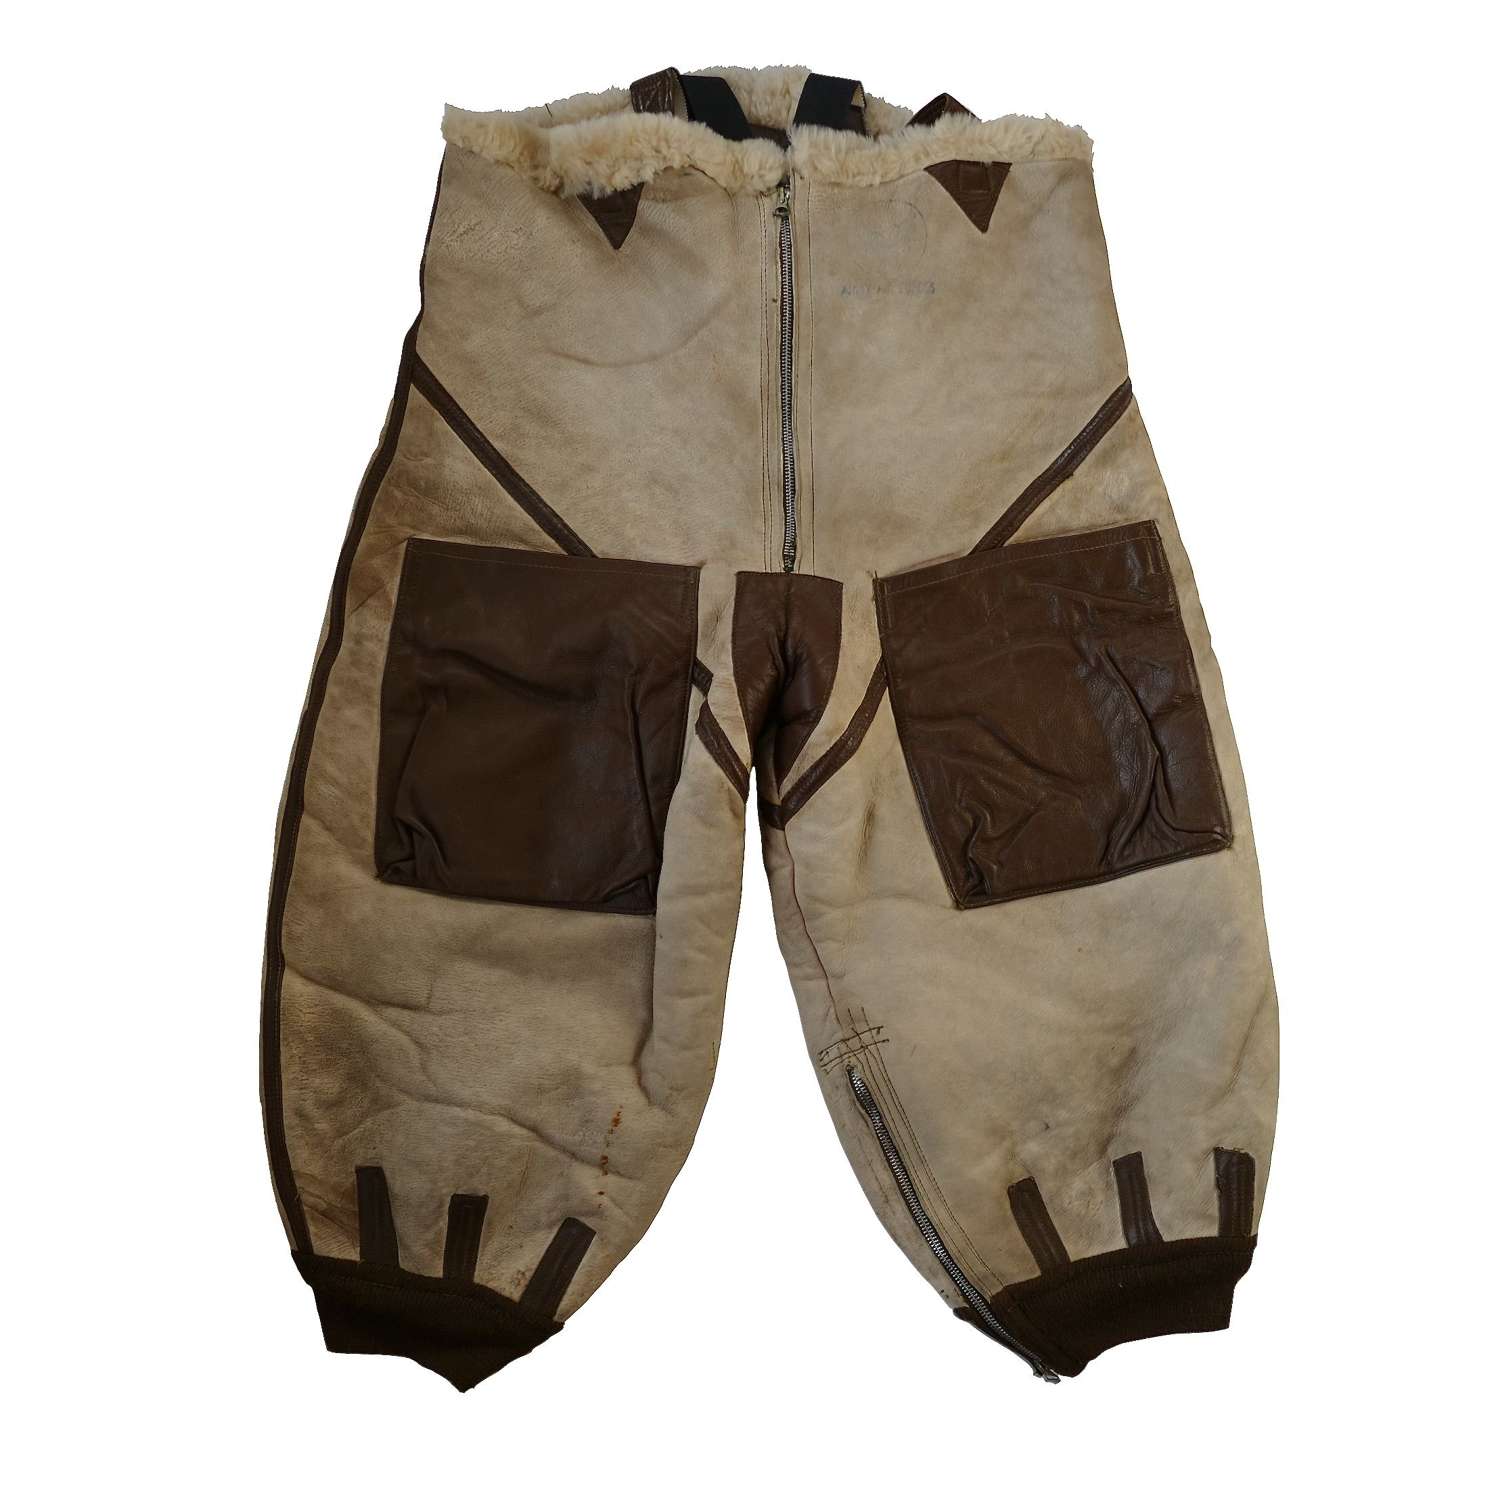 USAAF A-6 winter flying trousers